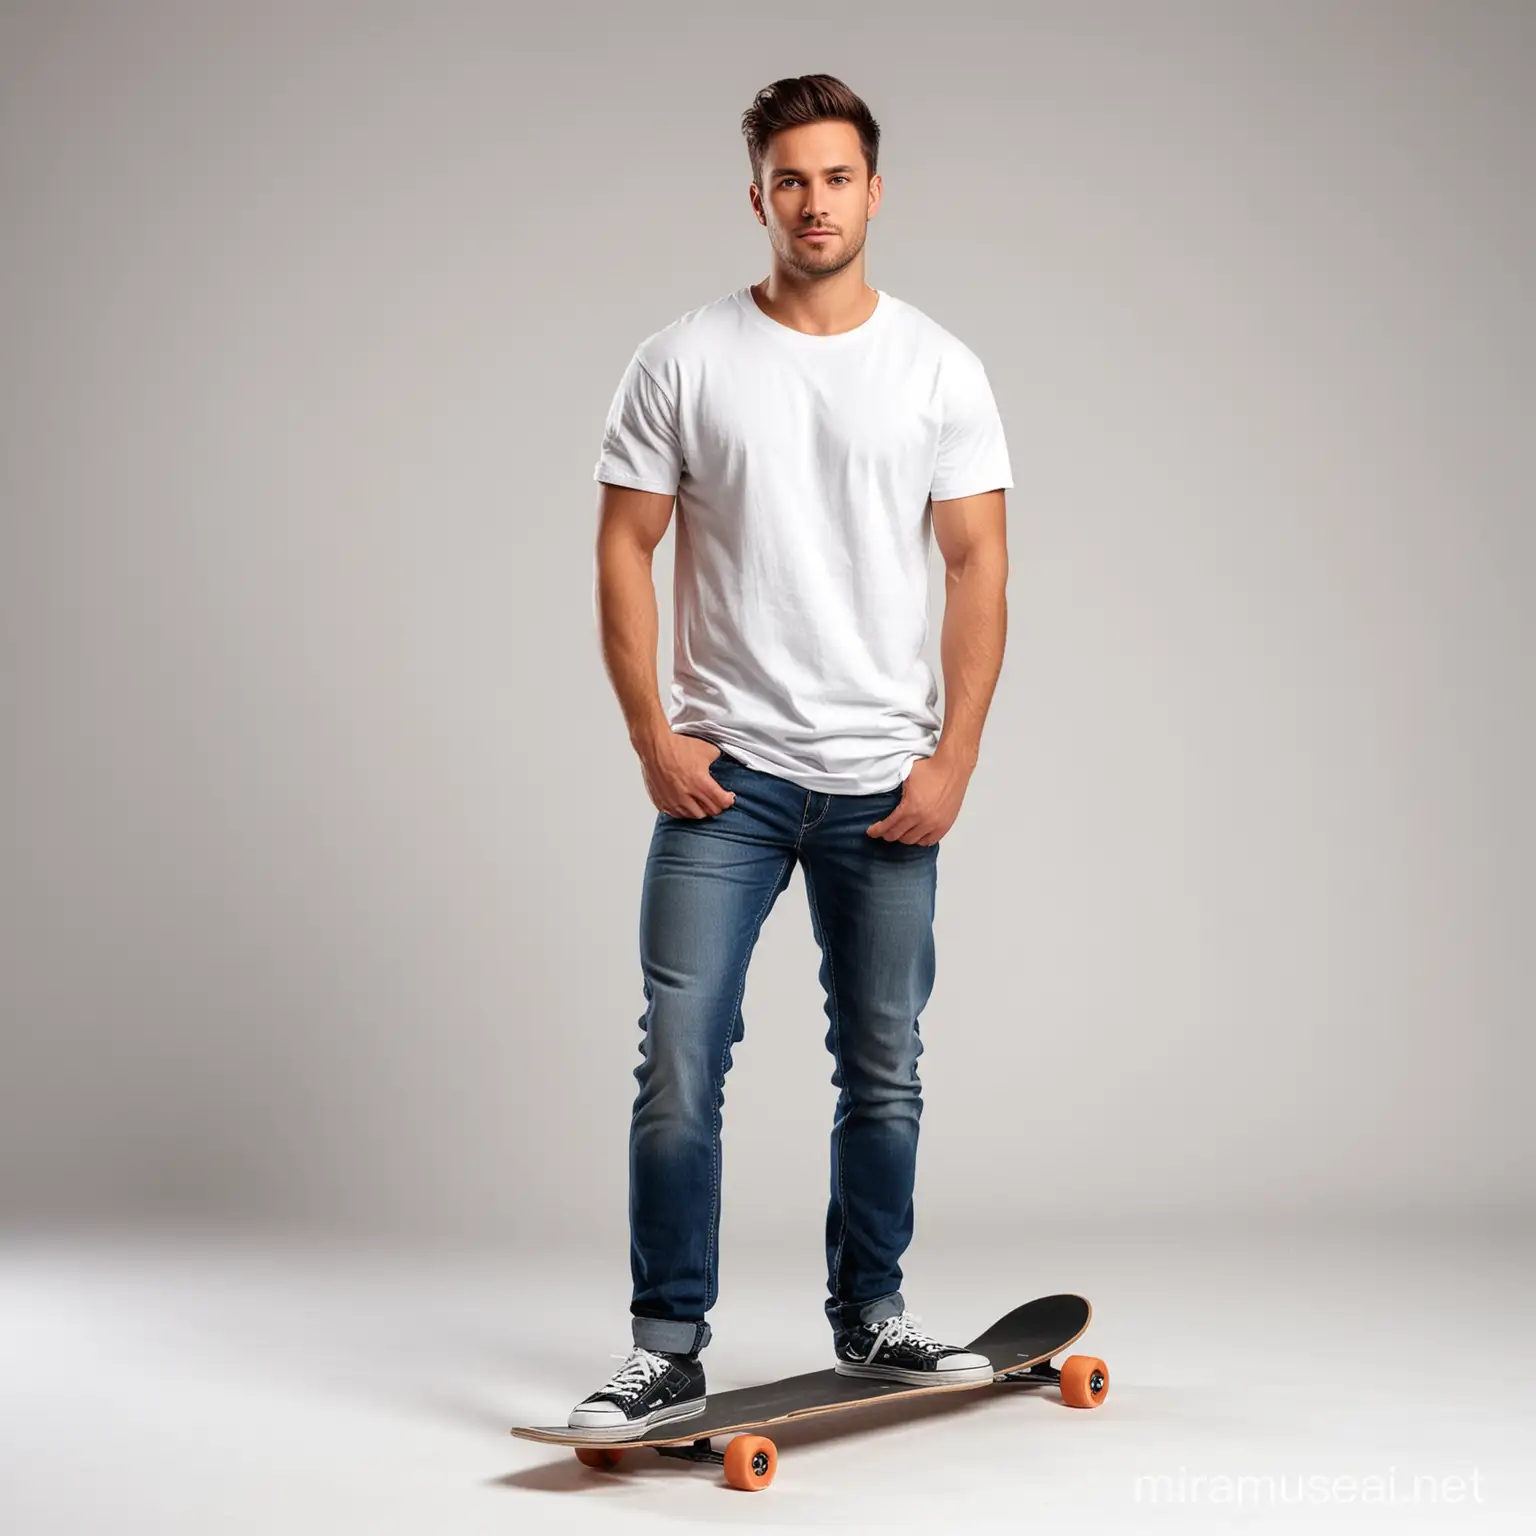 Attractive Young Man Holding Longboard in Studio Photoshoot